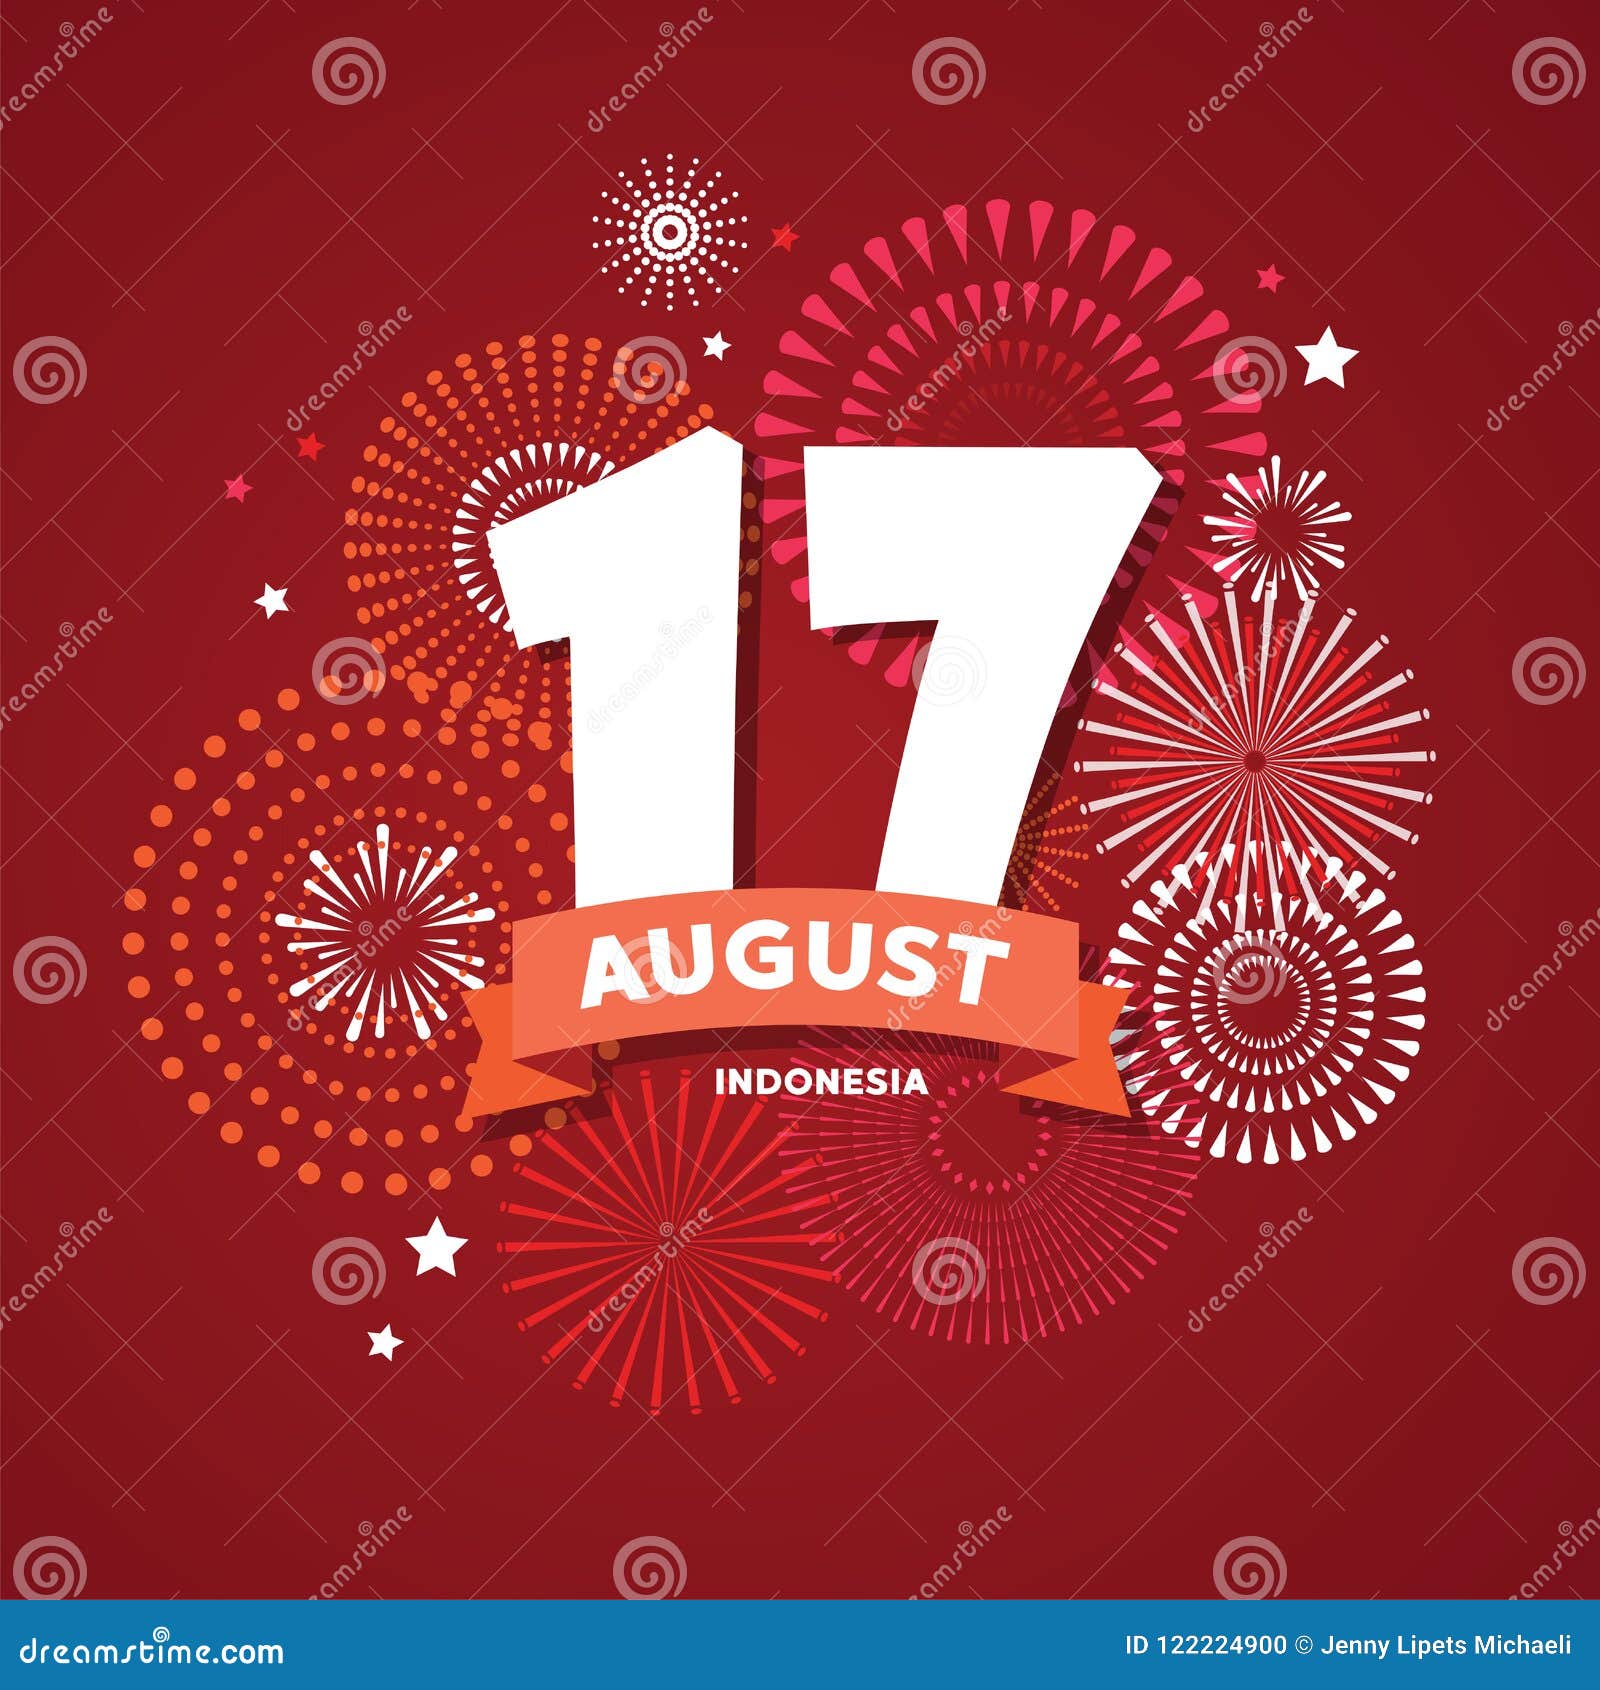 17 of August on Firework Background. Poster for Celebrate the National